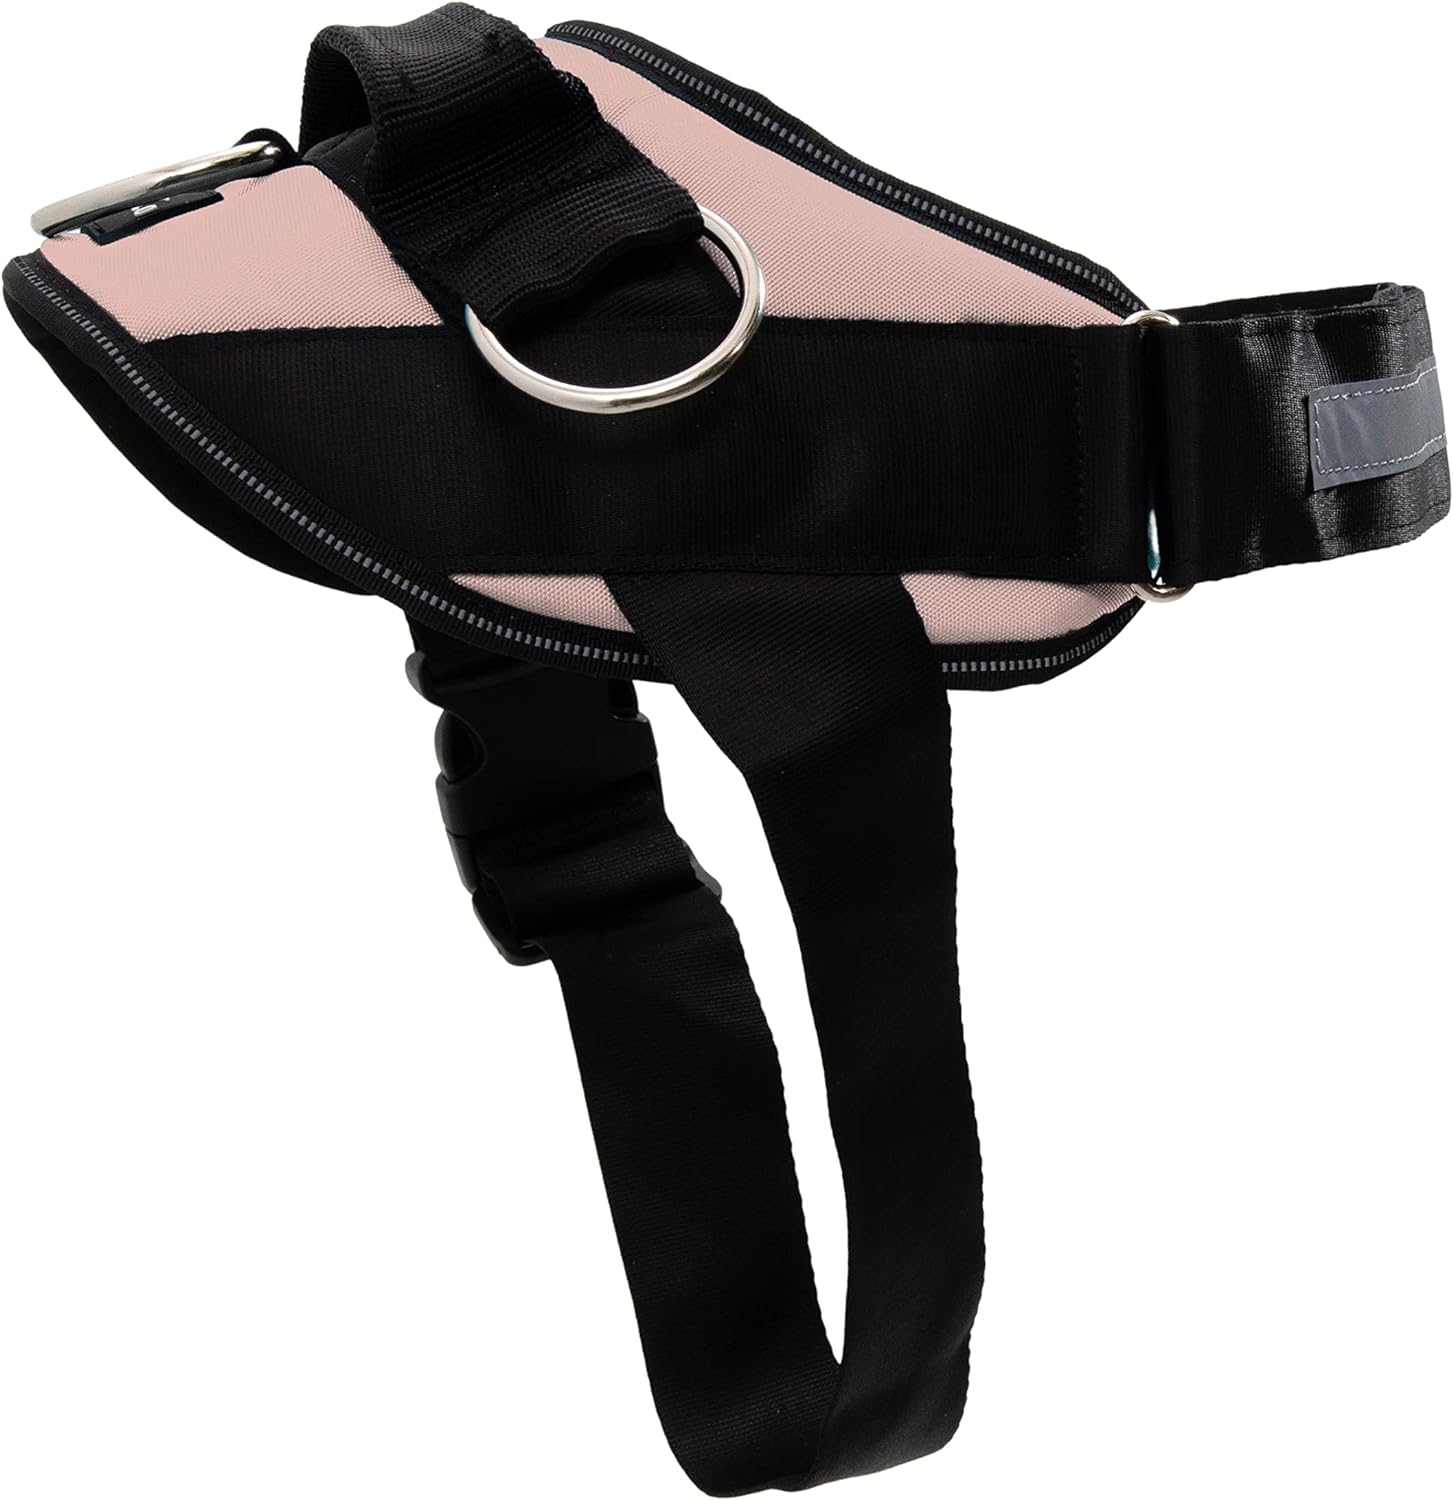 ShawnCo Essential Dog Harness, No-Pull Pet Vest with 3 Leash Clips, No Choke, Reflective, Adjustable and Padded, for Easy Walking and Training for Small, Medium and Large Dogs (Rose Gold, L)